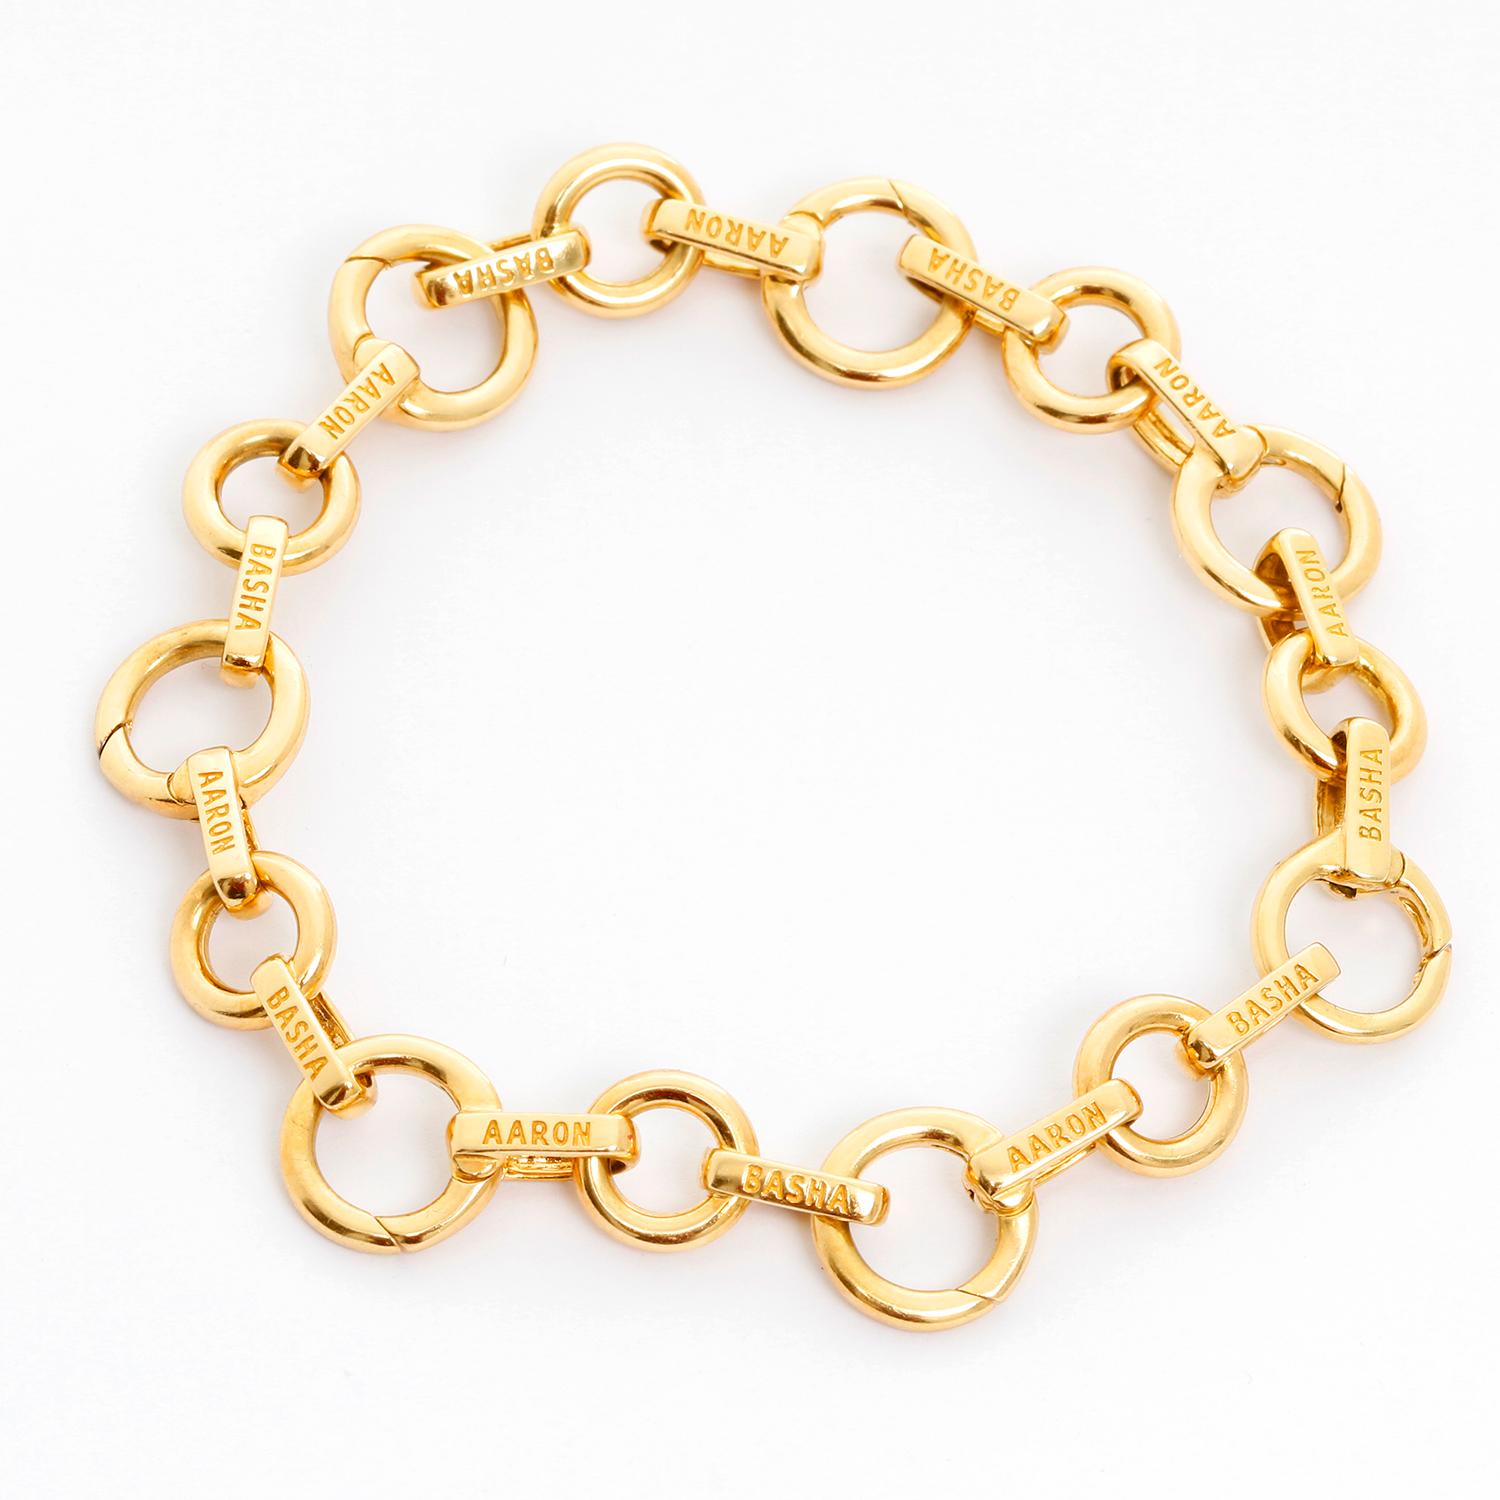 18K Yellow Gold Bracelet with small open links ( 7 ) for charms. Wrist size 6 3/4 inches. Total weight 24.4 grams. Hallmarked on each link Aaron Basha.